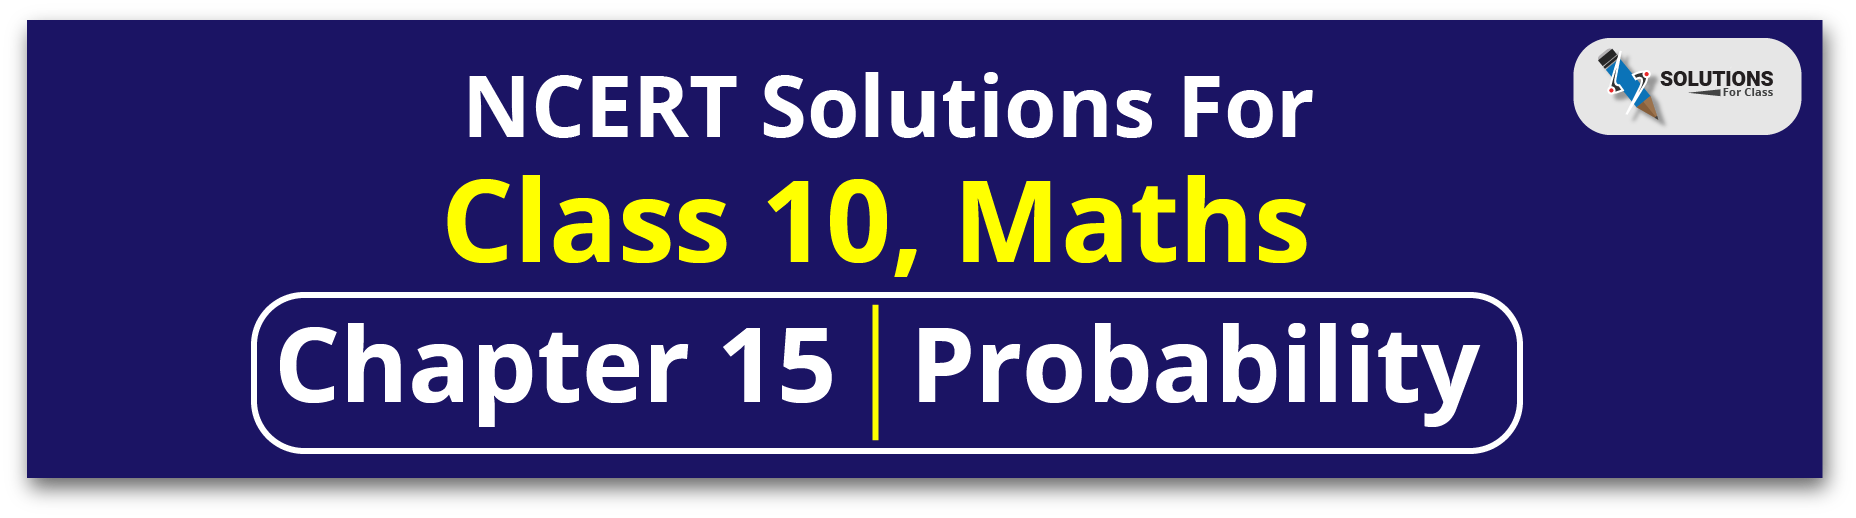 NCERT Solution For Class 10, Maths, Chapter 15, Probability